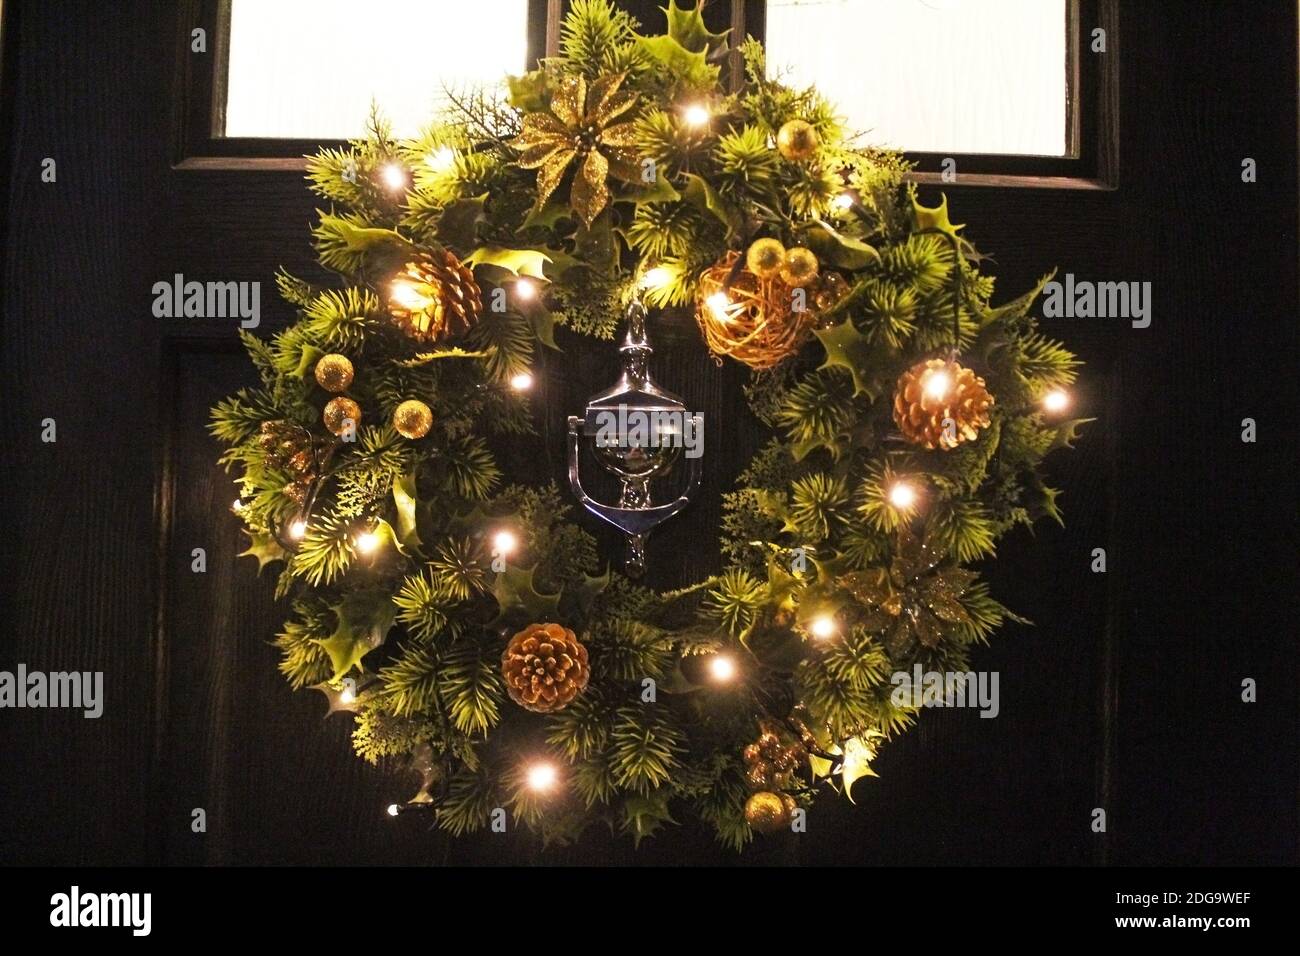 Artificial light-up posh Christmas wreath with gold flowers and pine cones hung on a black door with knocker in the centre in Manchester, England Stock Photo